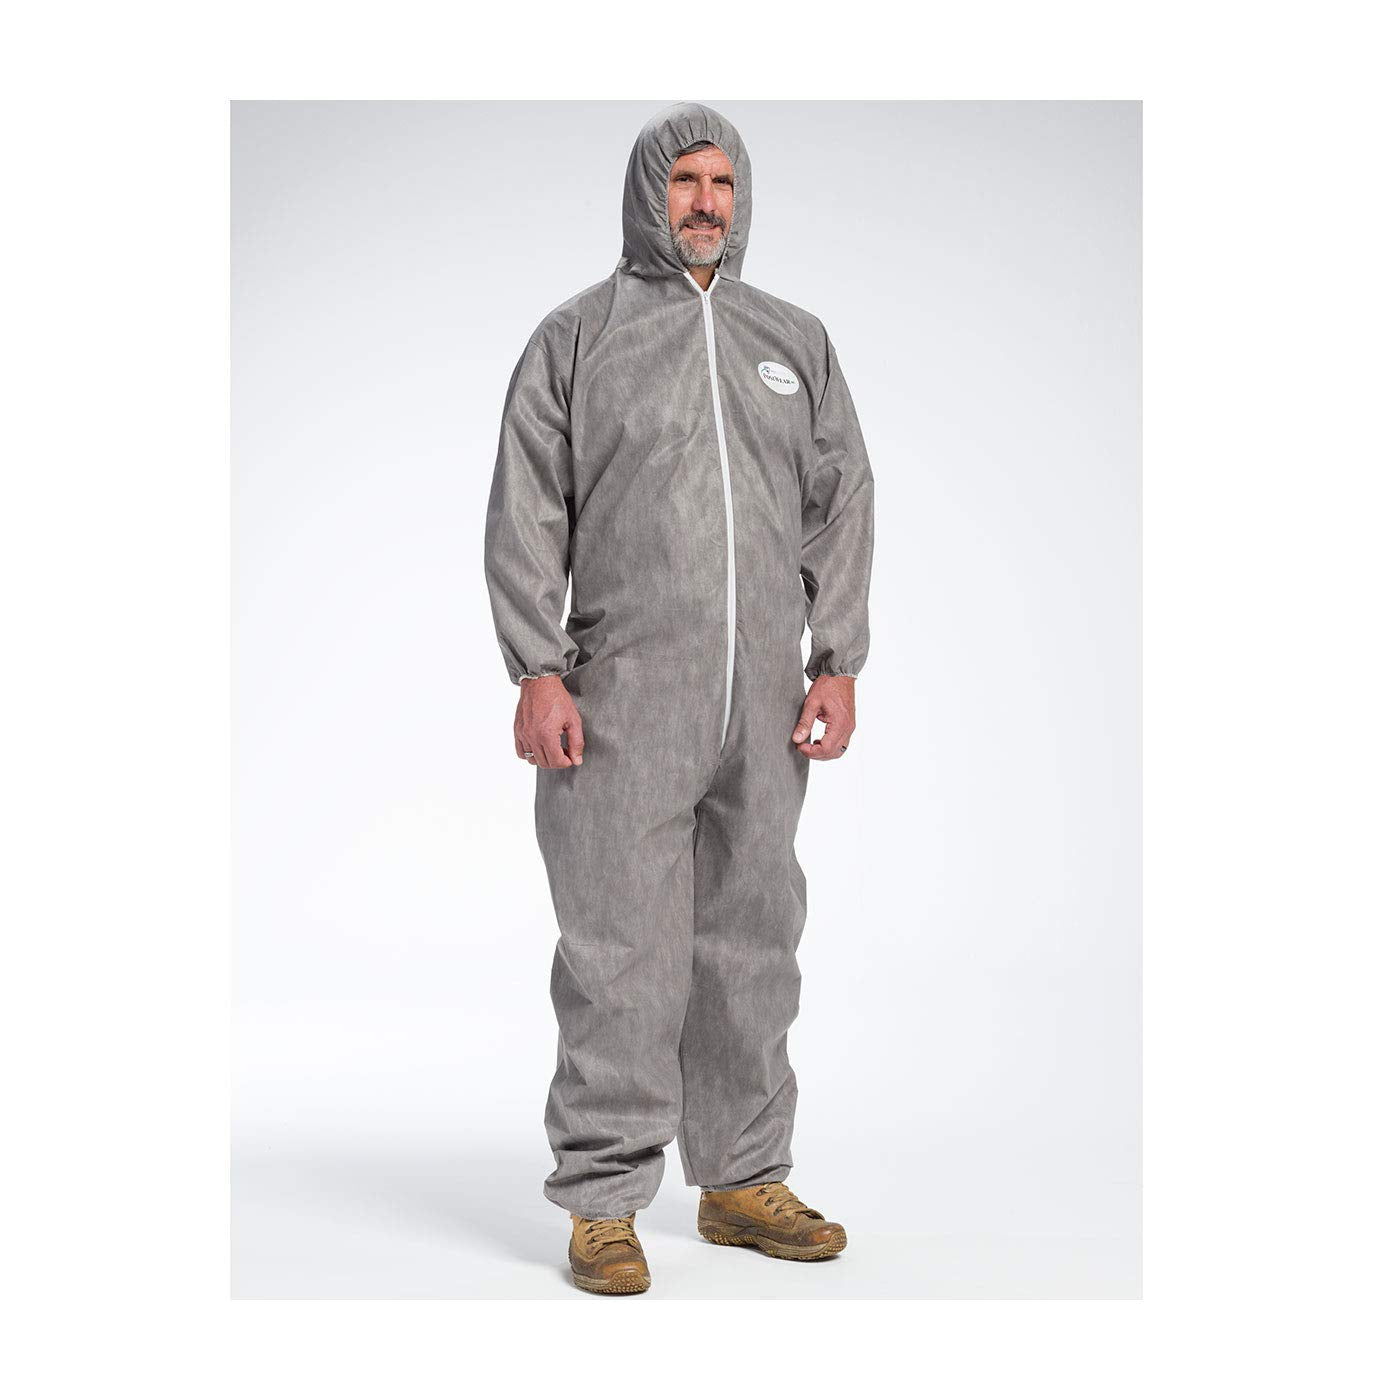 West Chester C3906 Gray XL Polypropylene Disposable General Purpose & Work Coveralls - Fits 27.6 in Chest - 29.5 in Inseam - Attached Hood, Elastic Ankles, Elastic Wrists - C3906/XL [PRICE is per EACH]